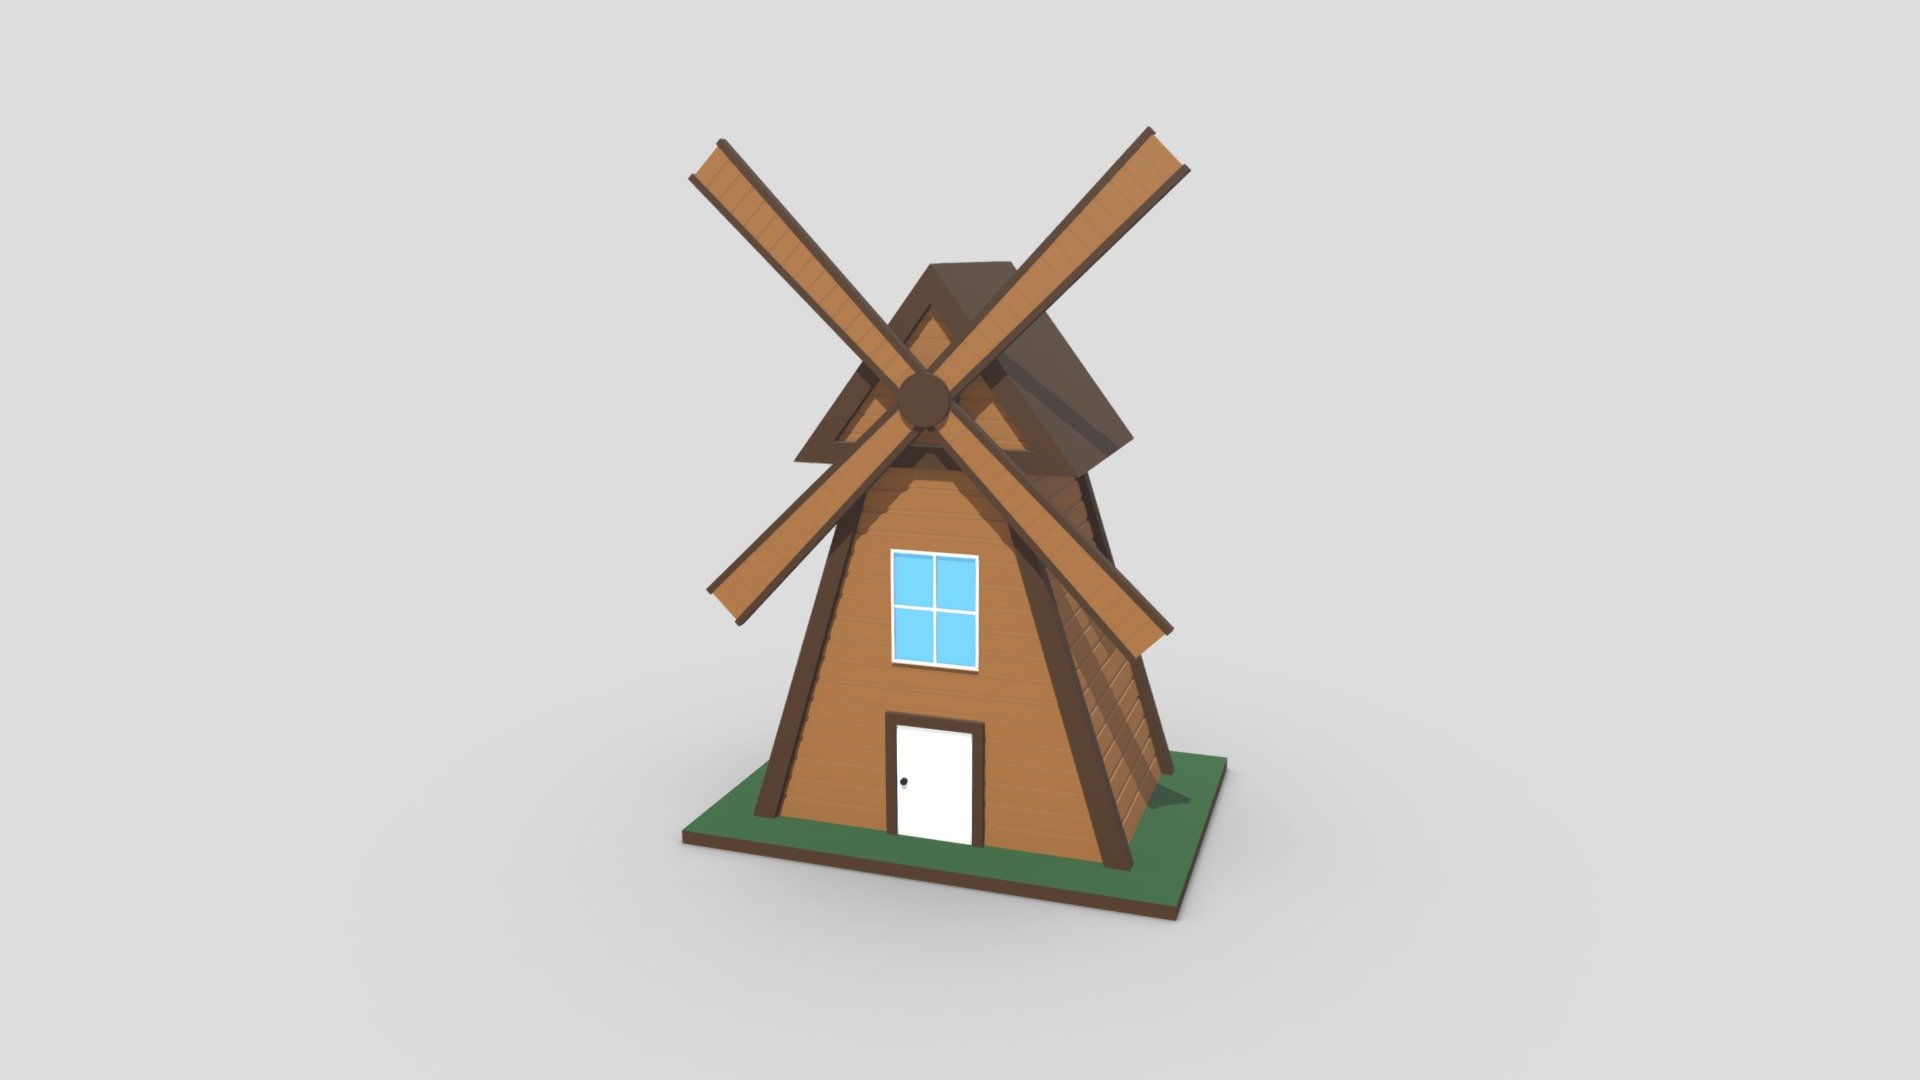 Windmill 3D model that I made using Blender. This is a simple, low poly windmill that has a rectangular shaped bottom and a triangular shaped top. There is also a door, window, and the windmill blades on the front.

Features:




Includes 1 low poly windmill 3D model

Model uses the metalness workflow and 4K PBR textures in PNG format

Model has been manually UV unwrapped

Blend file includes pre-applied textures/materials as well as camera setups, simple lighting and HDRi lighting

Model has been exported in 4 file formats (FBX, OBJ, GLTF/GLB, DAE/Collada)

Includes GLTF file type instructions and help document

Includes rendered images, wireframes, and extras

Included Textures:




AO, Diffuse, Roughness, Gloss

UVLayout

The source file is uploaded in FBX format and is used for demonstration. In the additional file you will find all model exports and the textures that go along with them 3d model